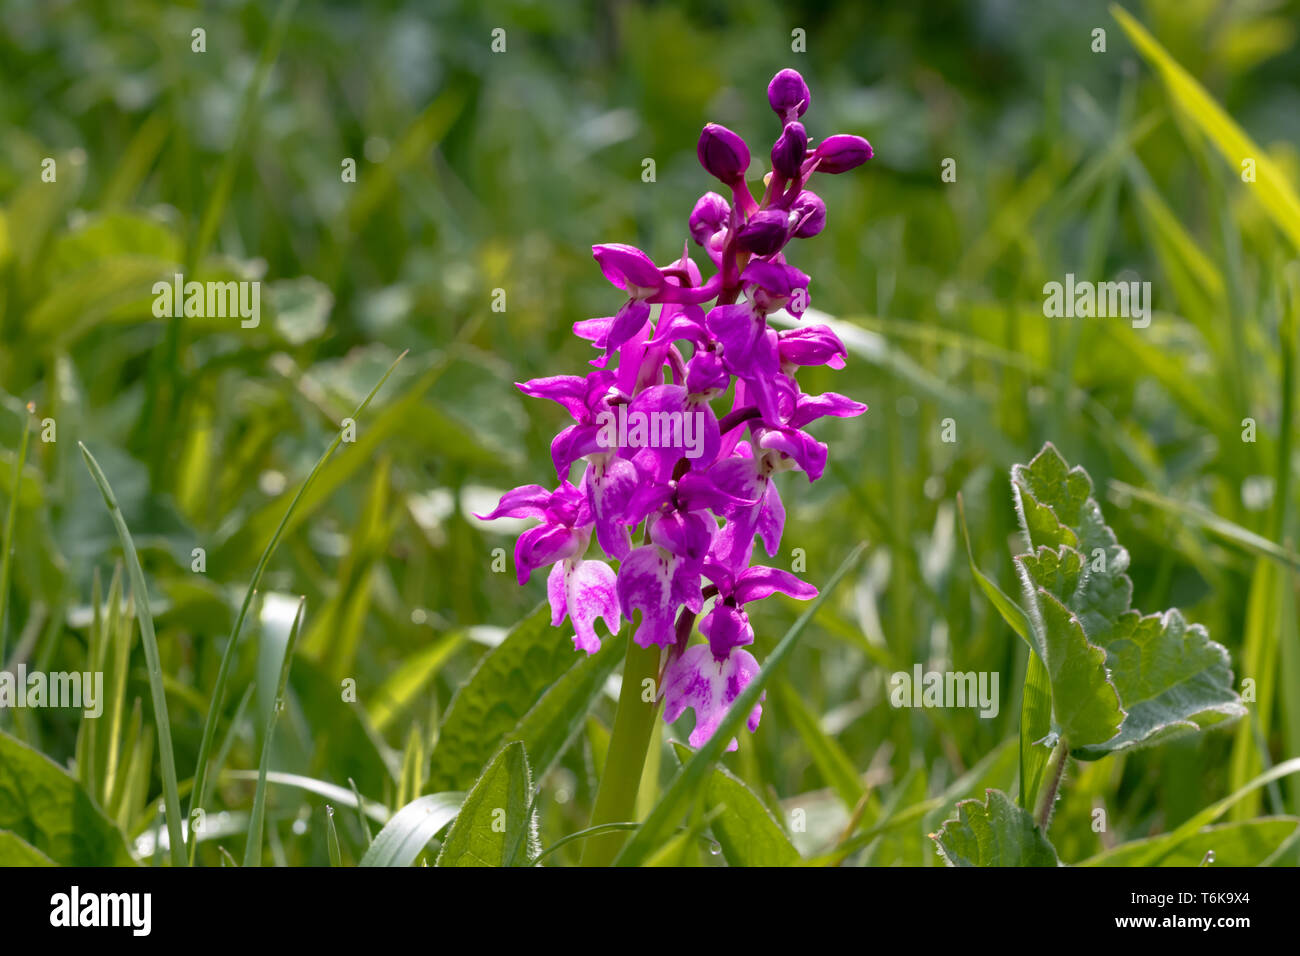 Flowering Early Purple Orchid Found on Lincolnshire Road Verge Stock Photo